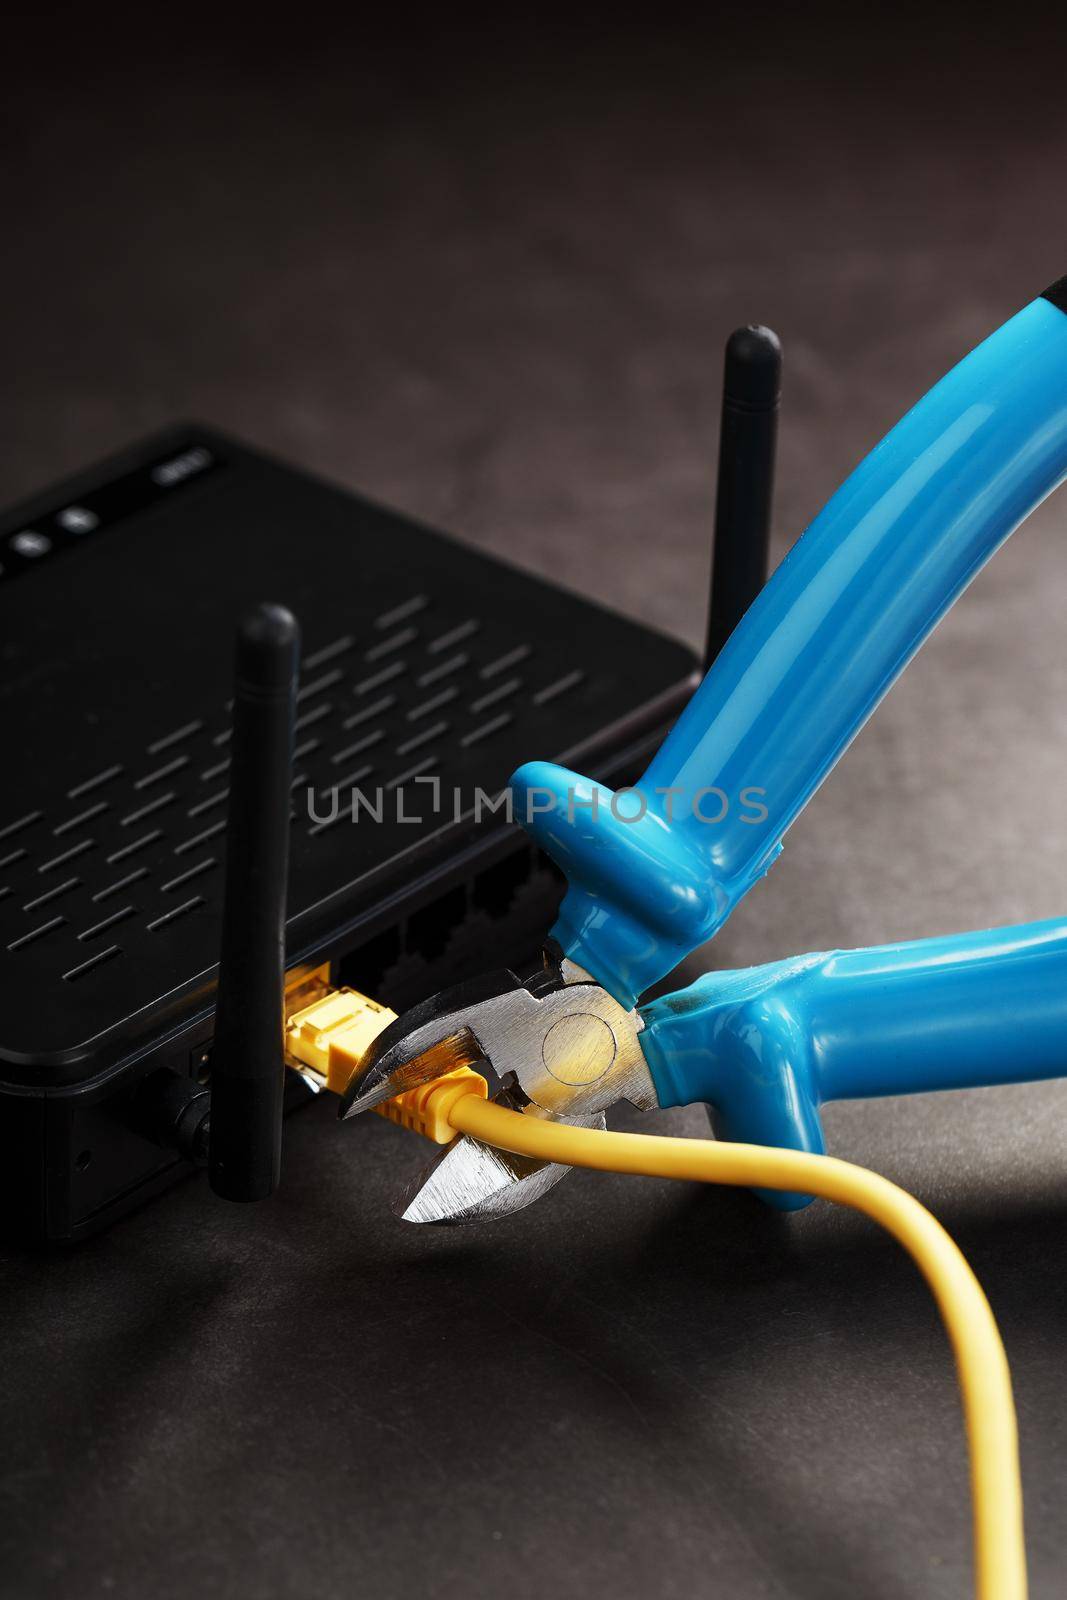 Cutting and disconnecting the network Internet connection with cutting pliers. Disabling the Wi-Fi router network. Life without internet. Disconnection for non-payment